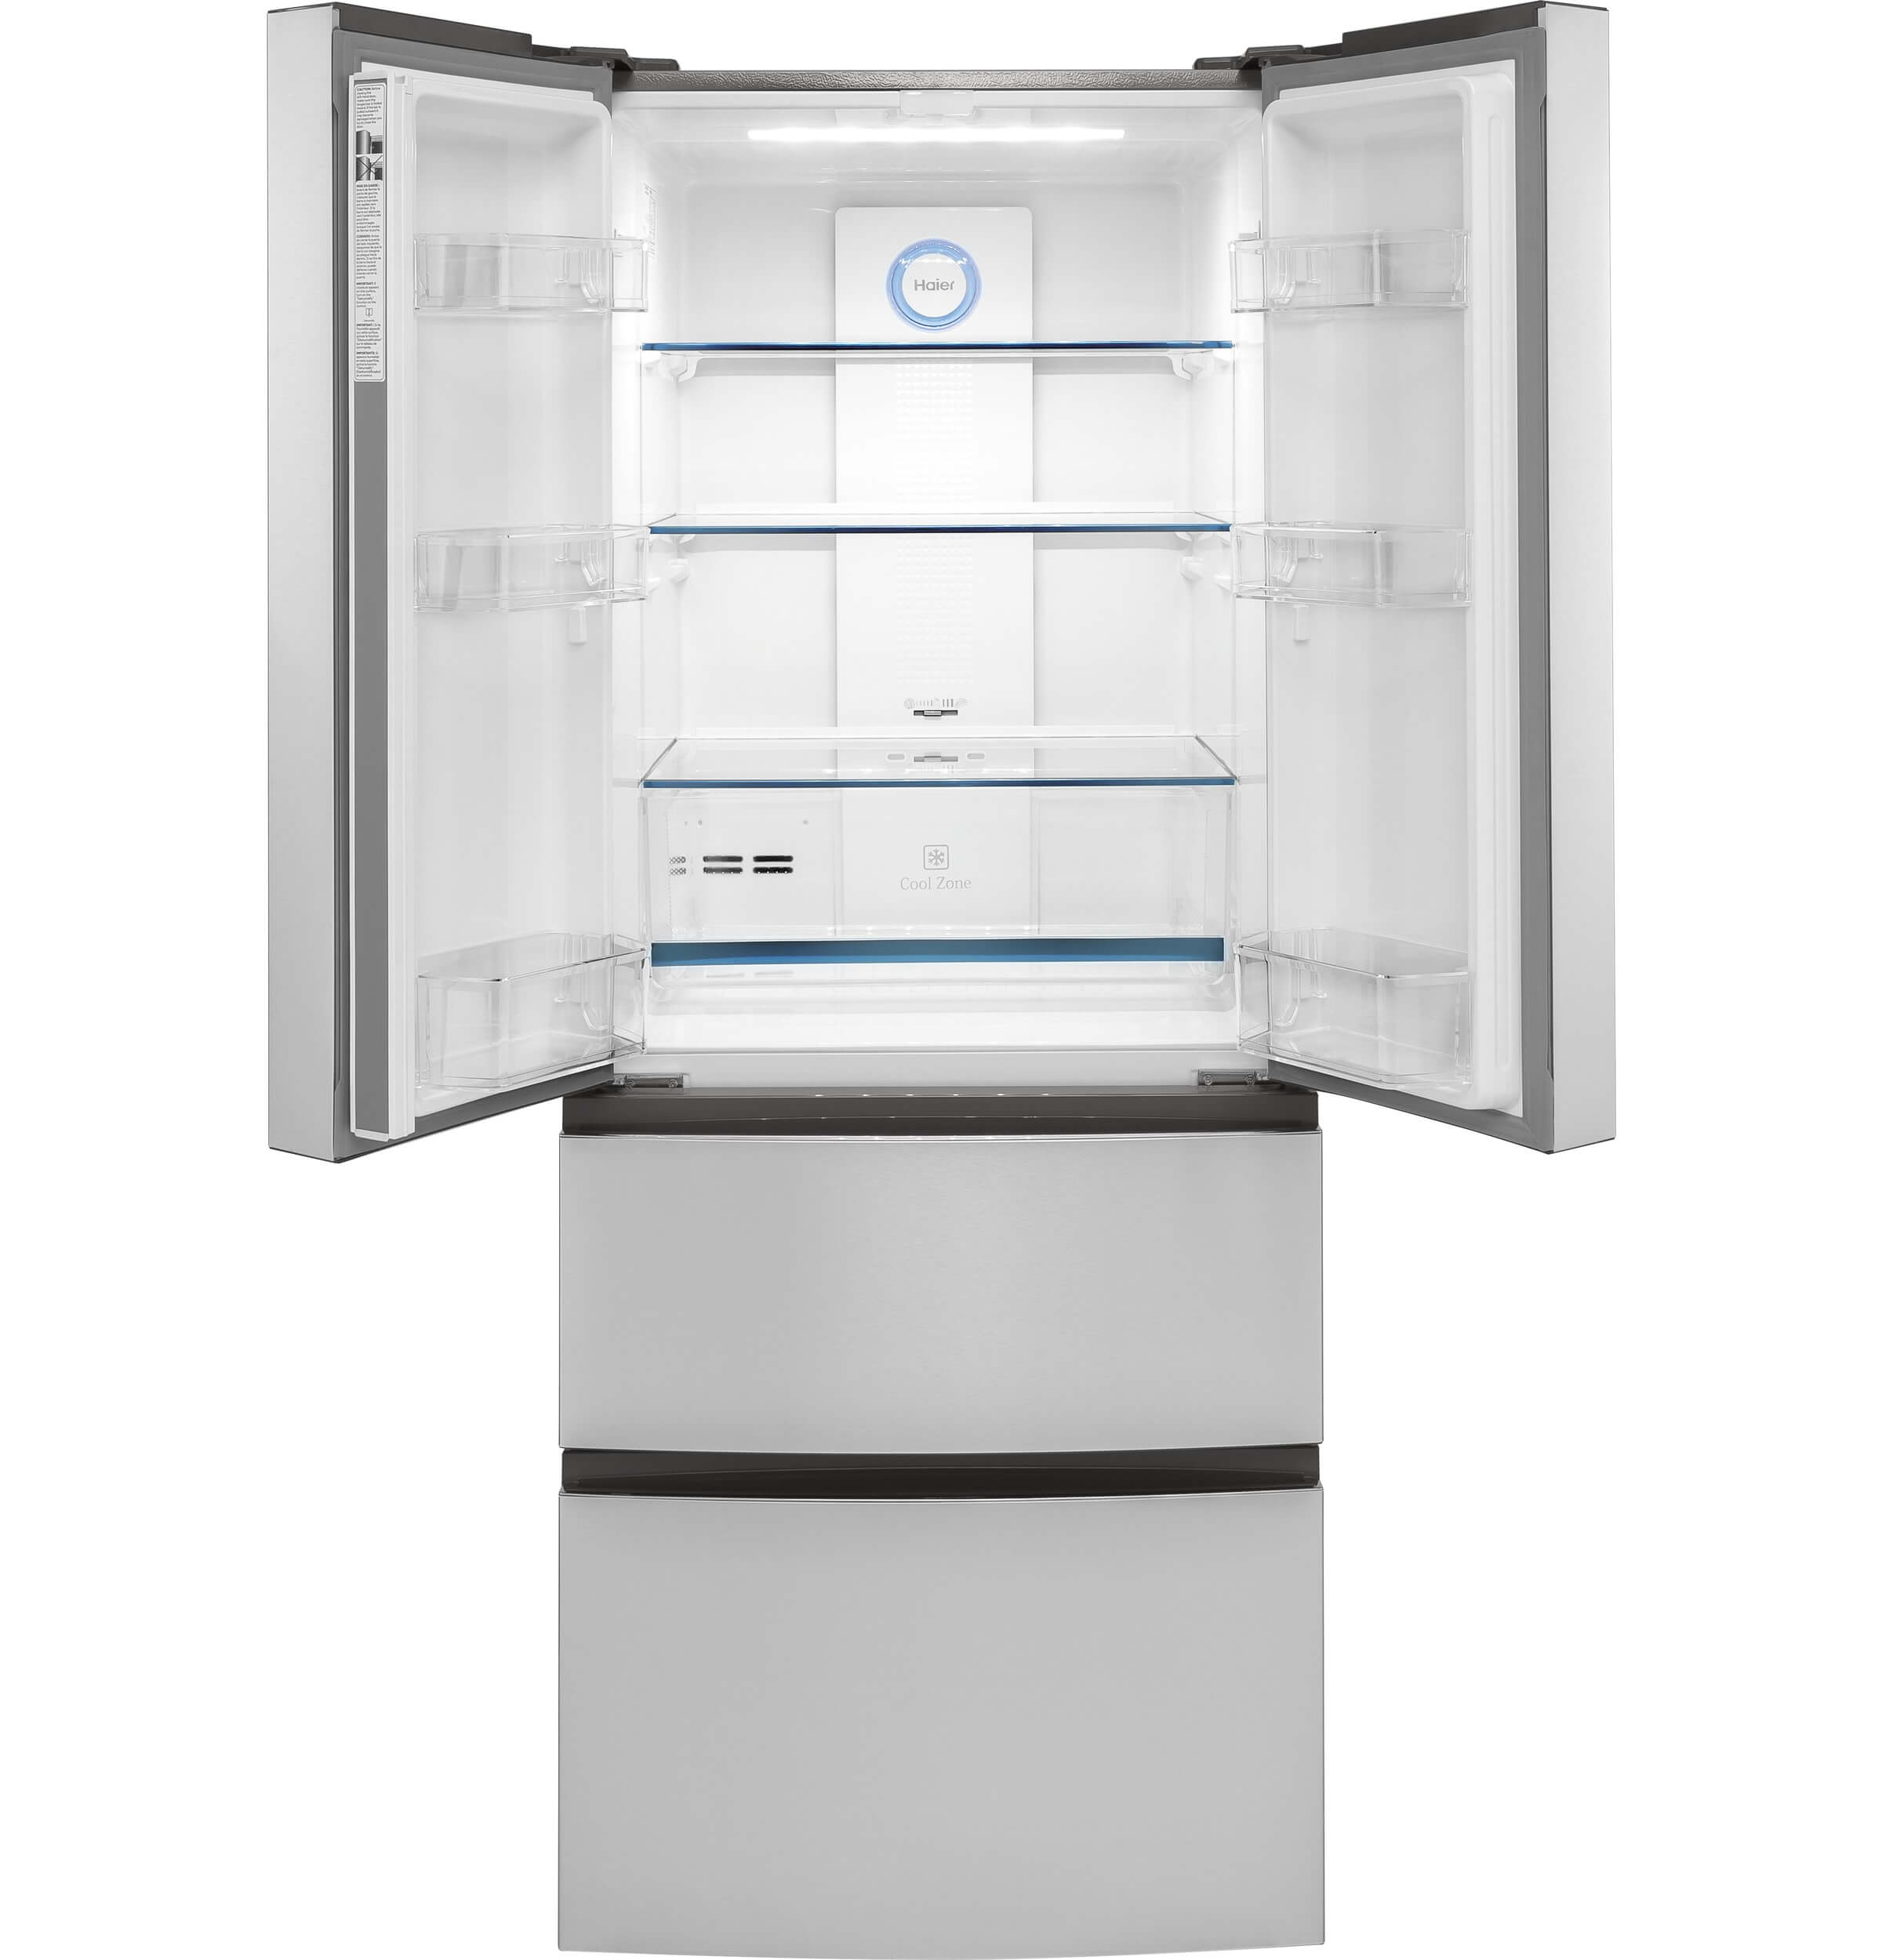 Haier HRF15N3AGS 15 Cu. Feet. Stainless French Door Refrigerator - image 3 of 7